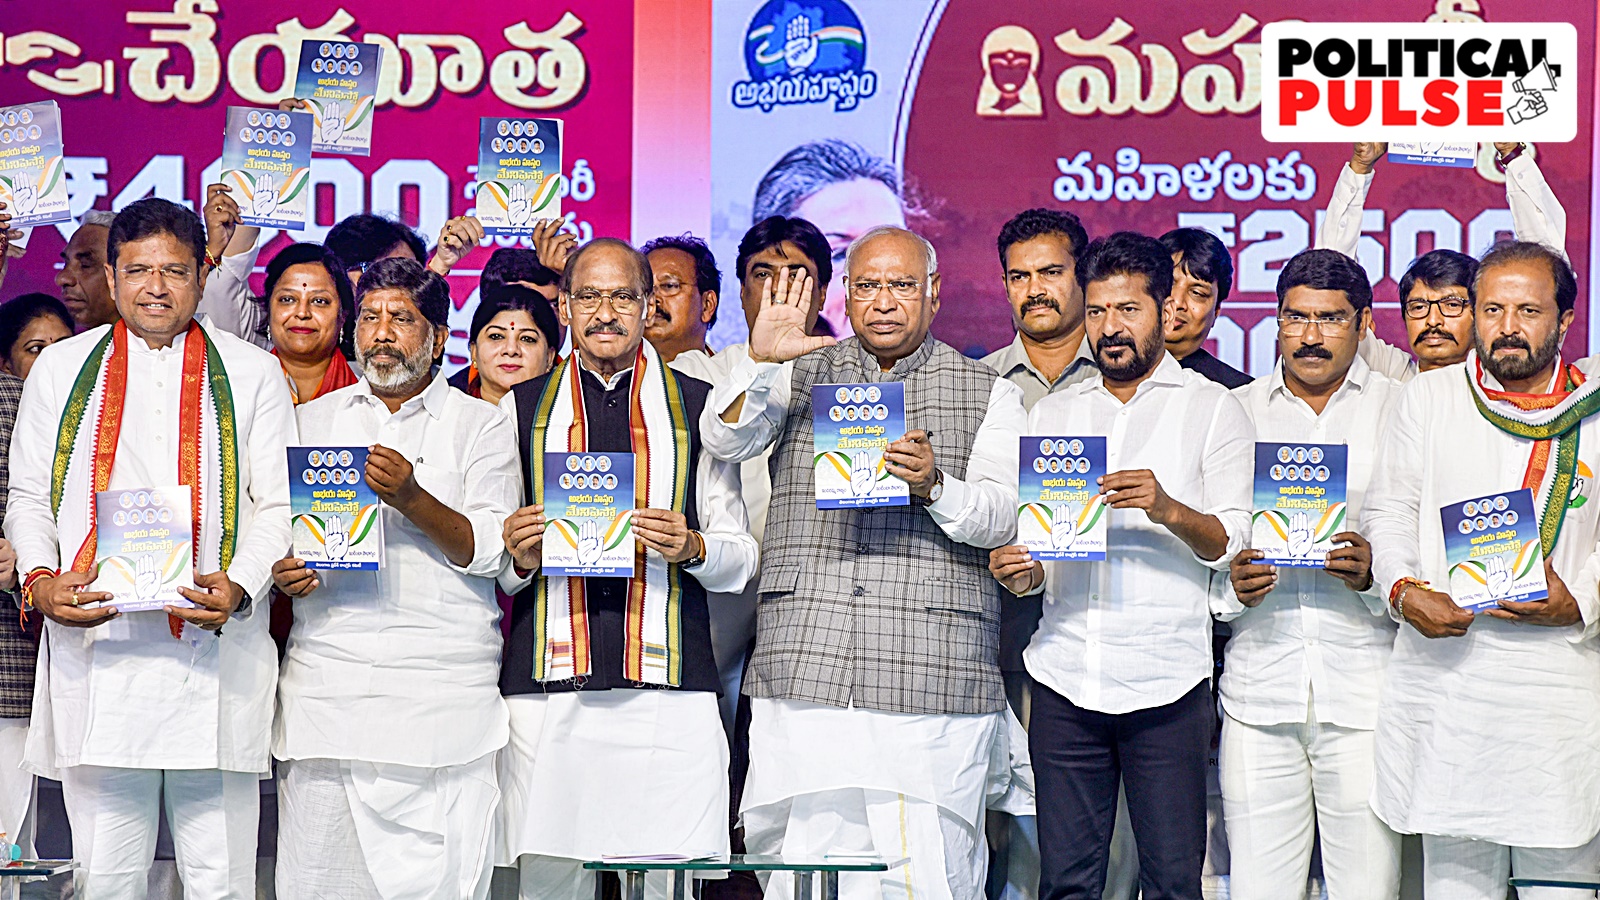 With Telangana manifesto, Congress tries to outdo BRS sop for sop